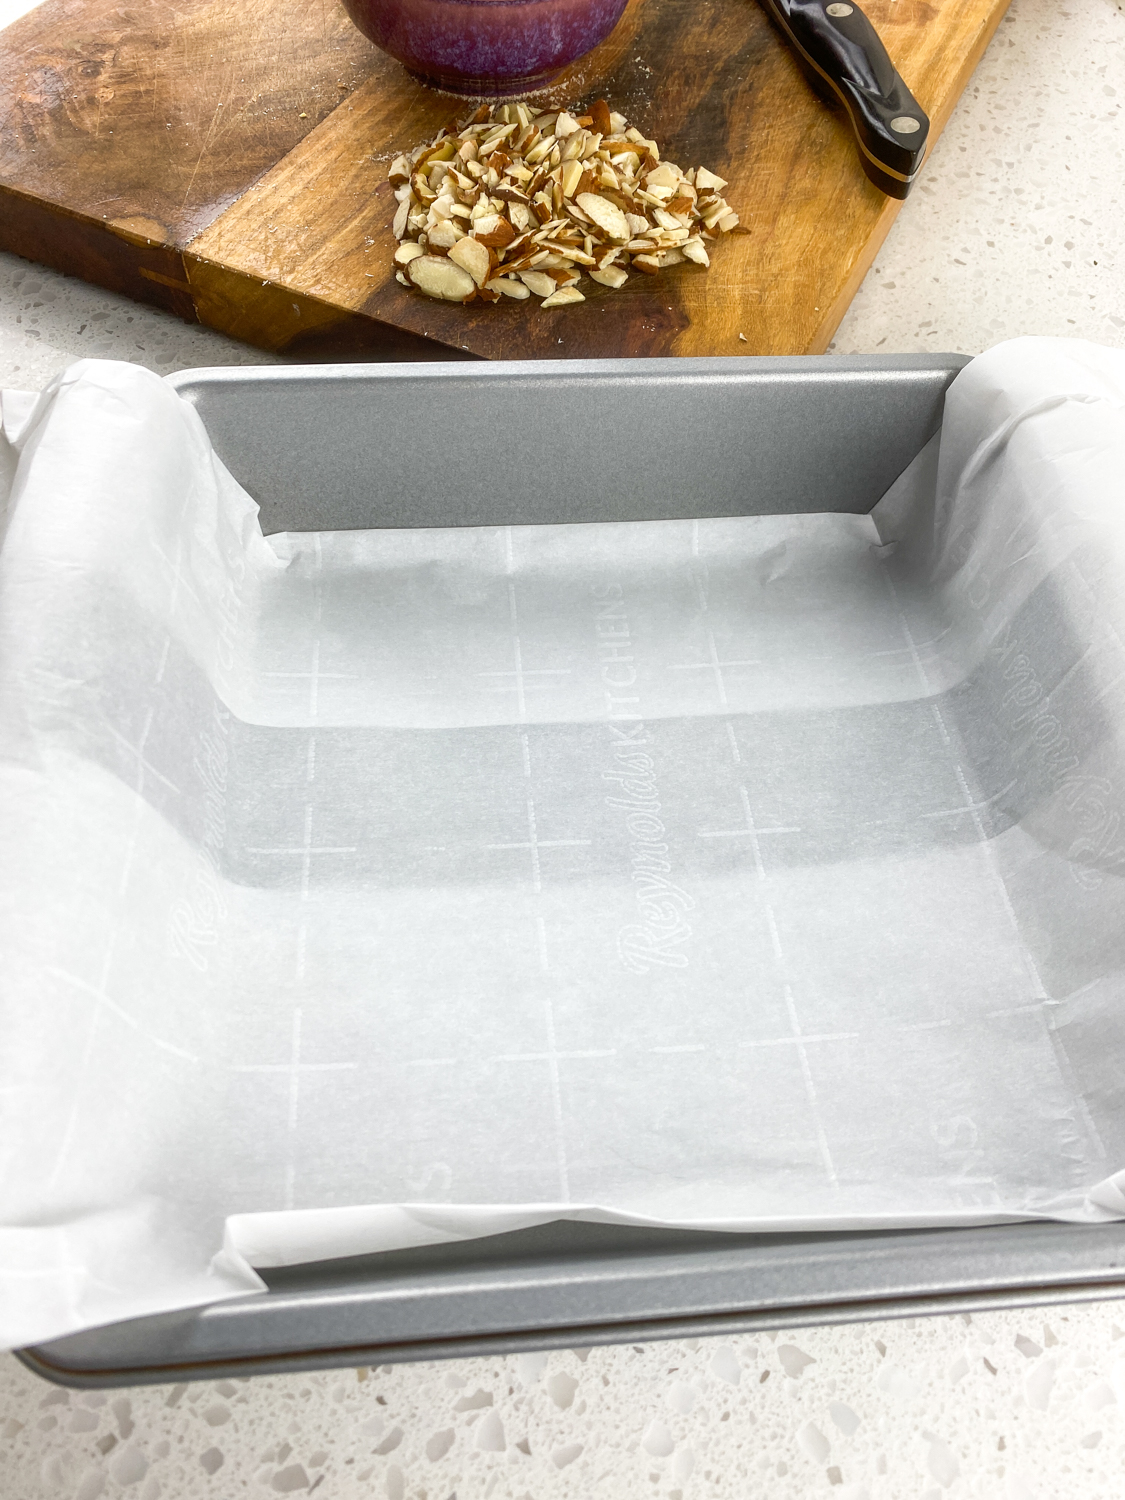 Parchment folded to make a sling and laid out inside a baking pan.